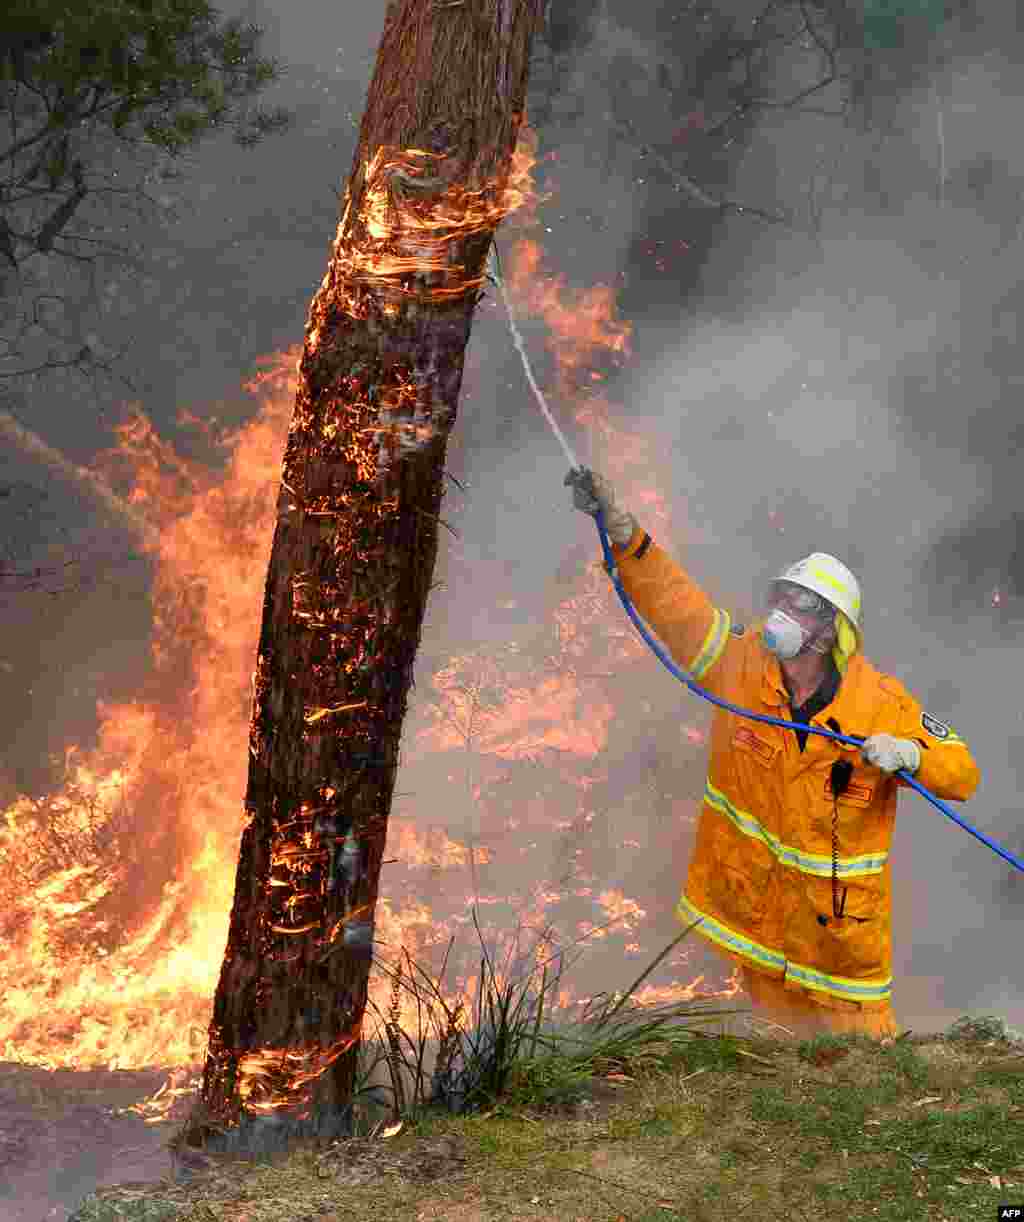 A firefighter contains fires from a resident's backyard at Faulconbridge in the Blue Mountains, Australia.